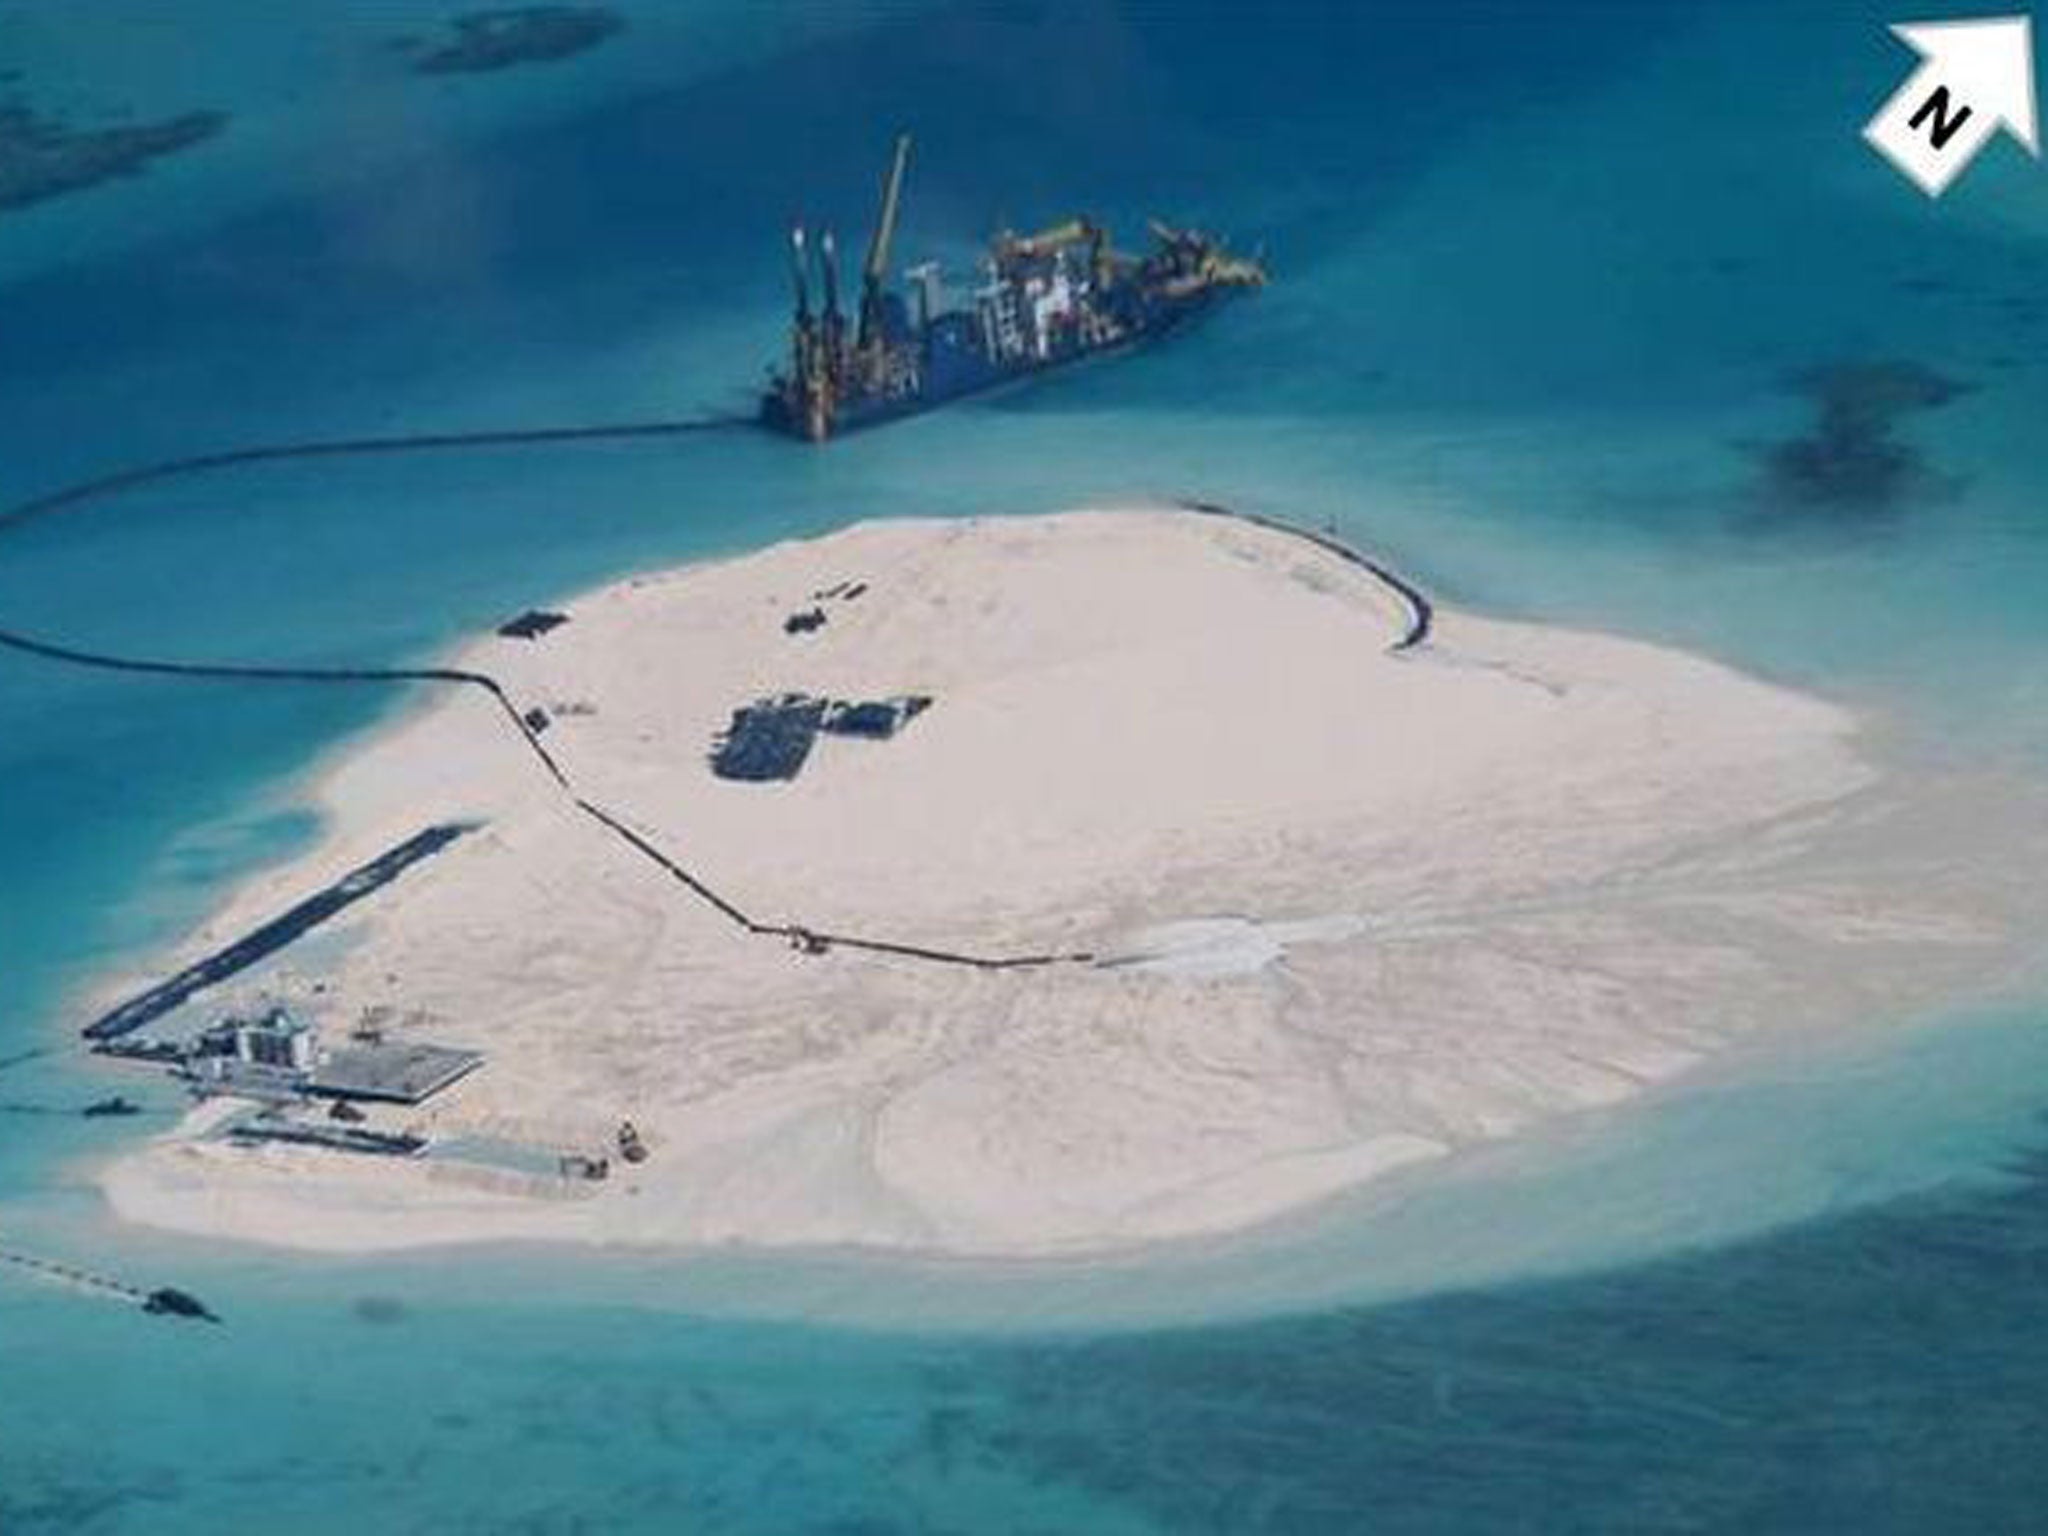 Image released by the Philippines government the alleged reclamation by China on what is internationally recognised as the Johnson South Reef in the South China Sea